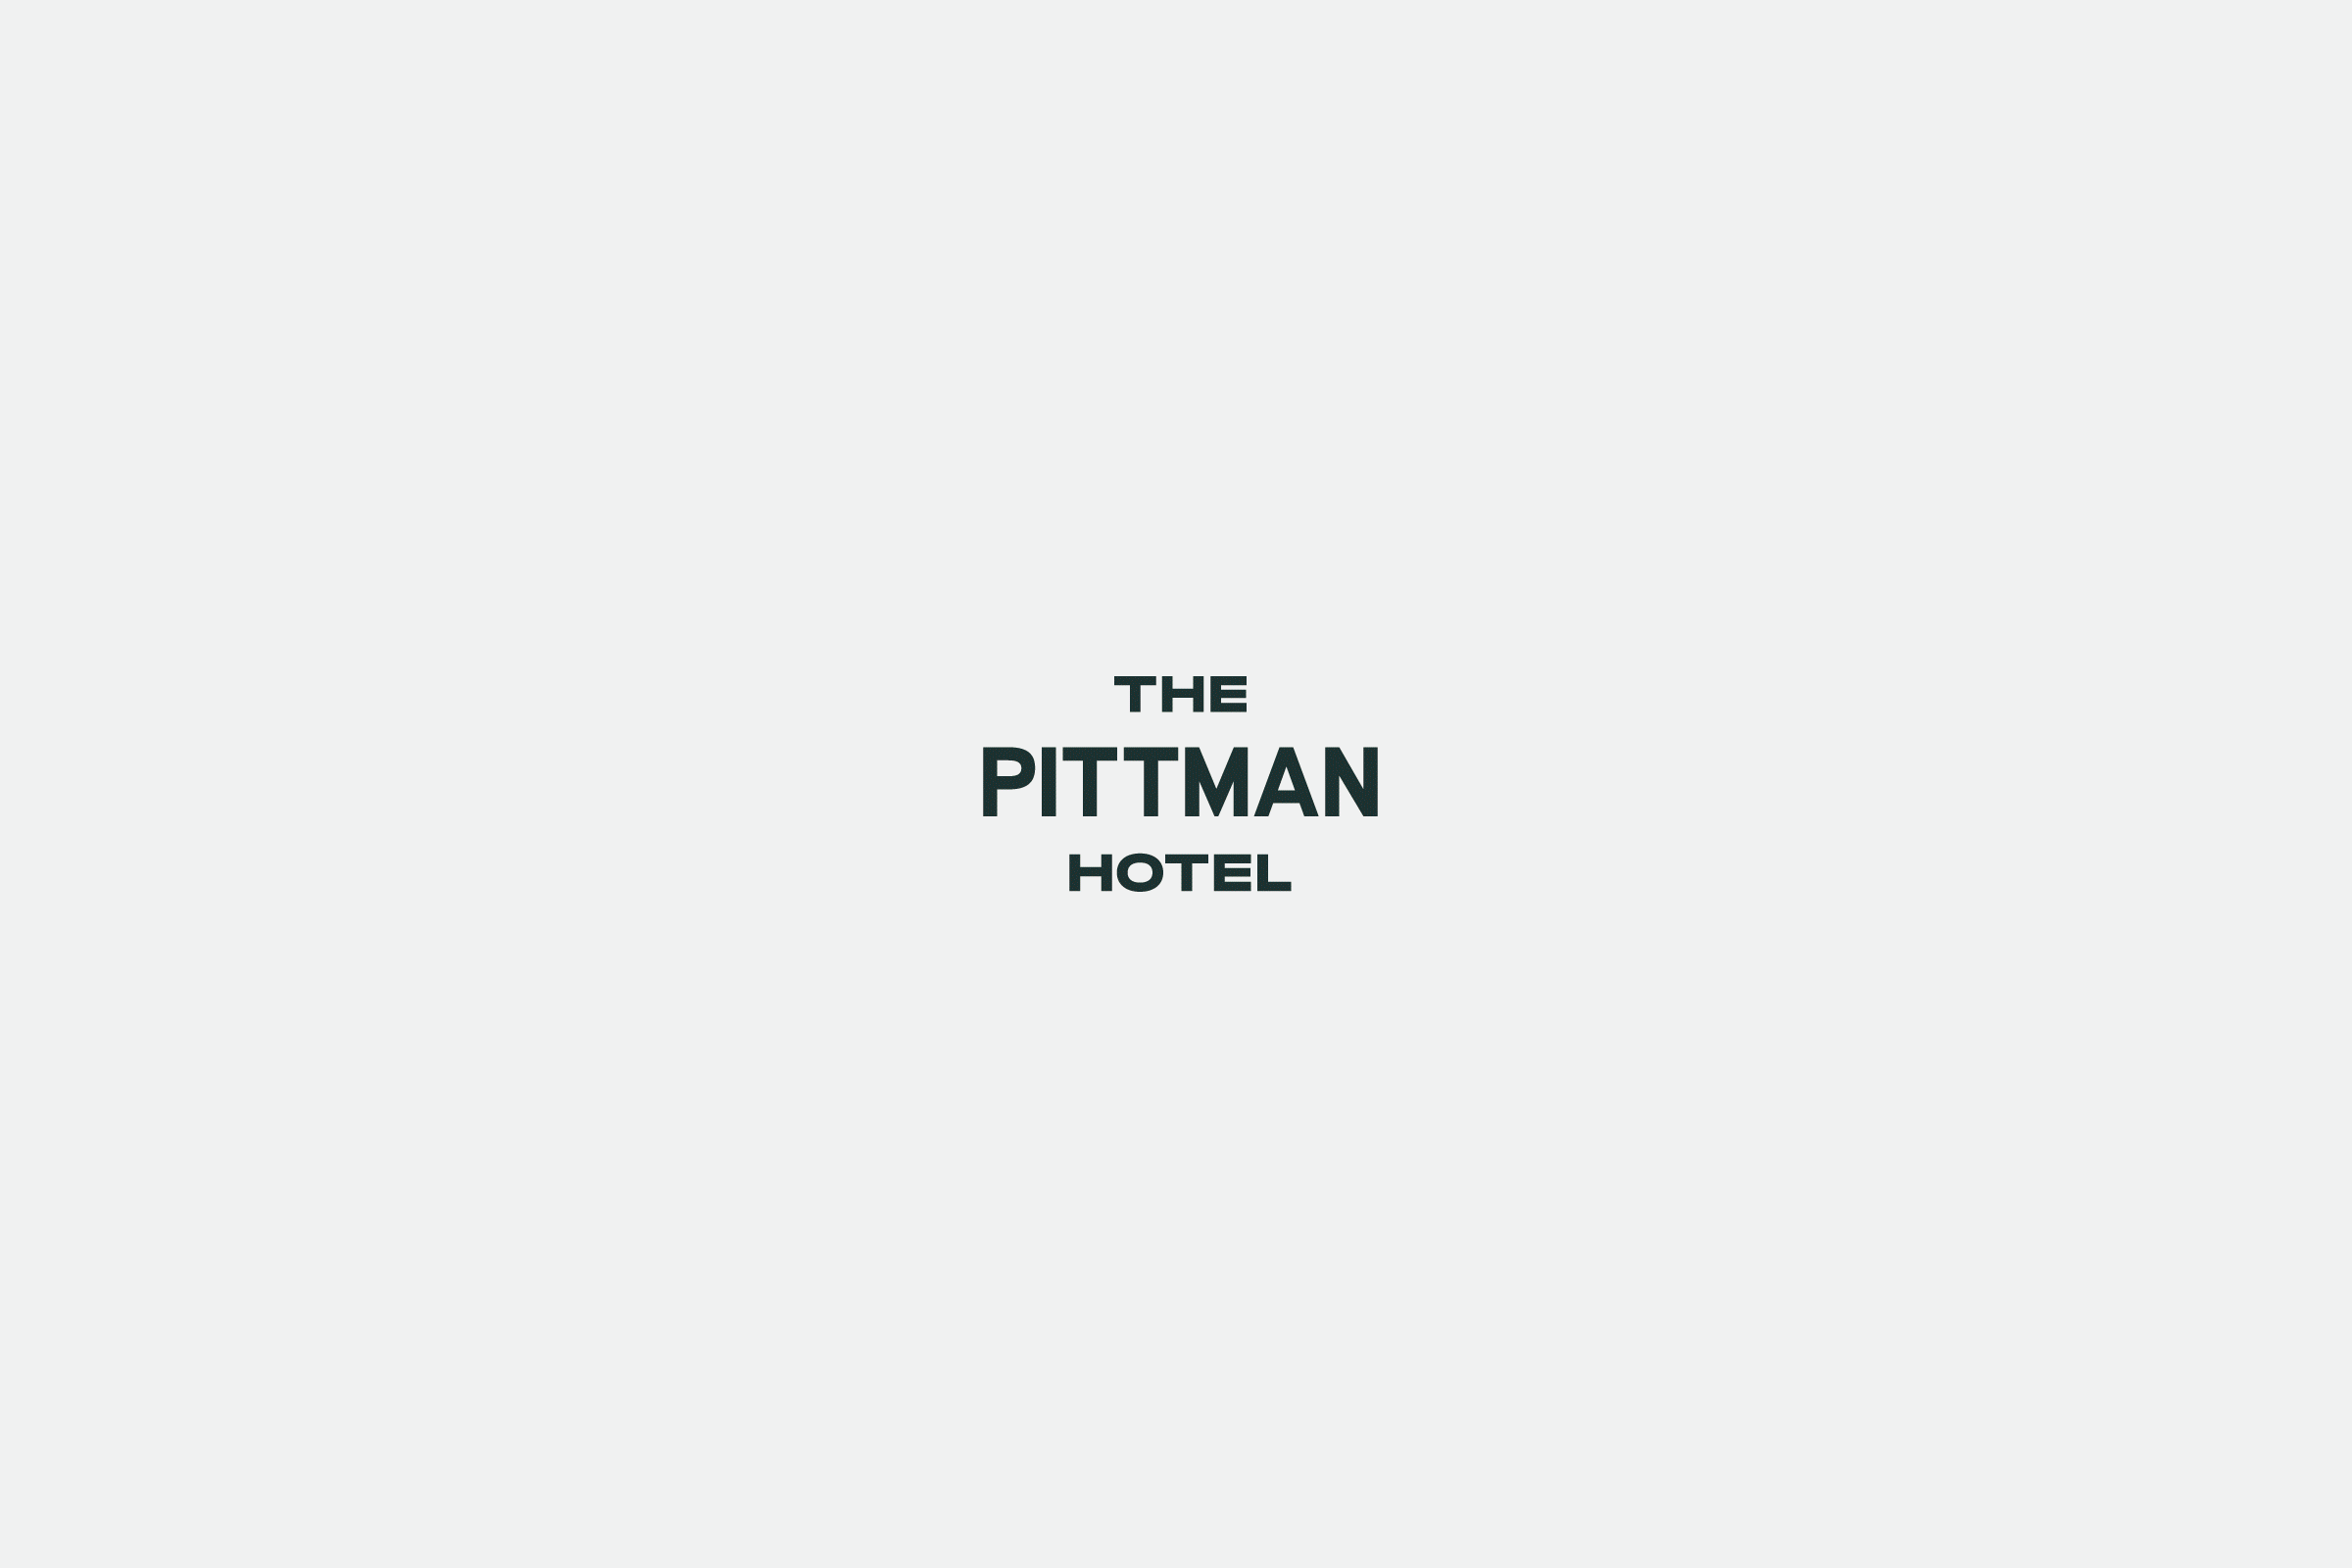 Animated graphic swapping between The Pittman Hotel logo and the hotel's facade